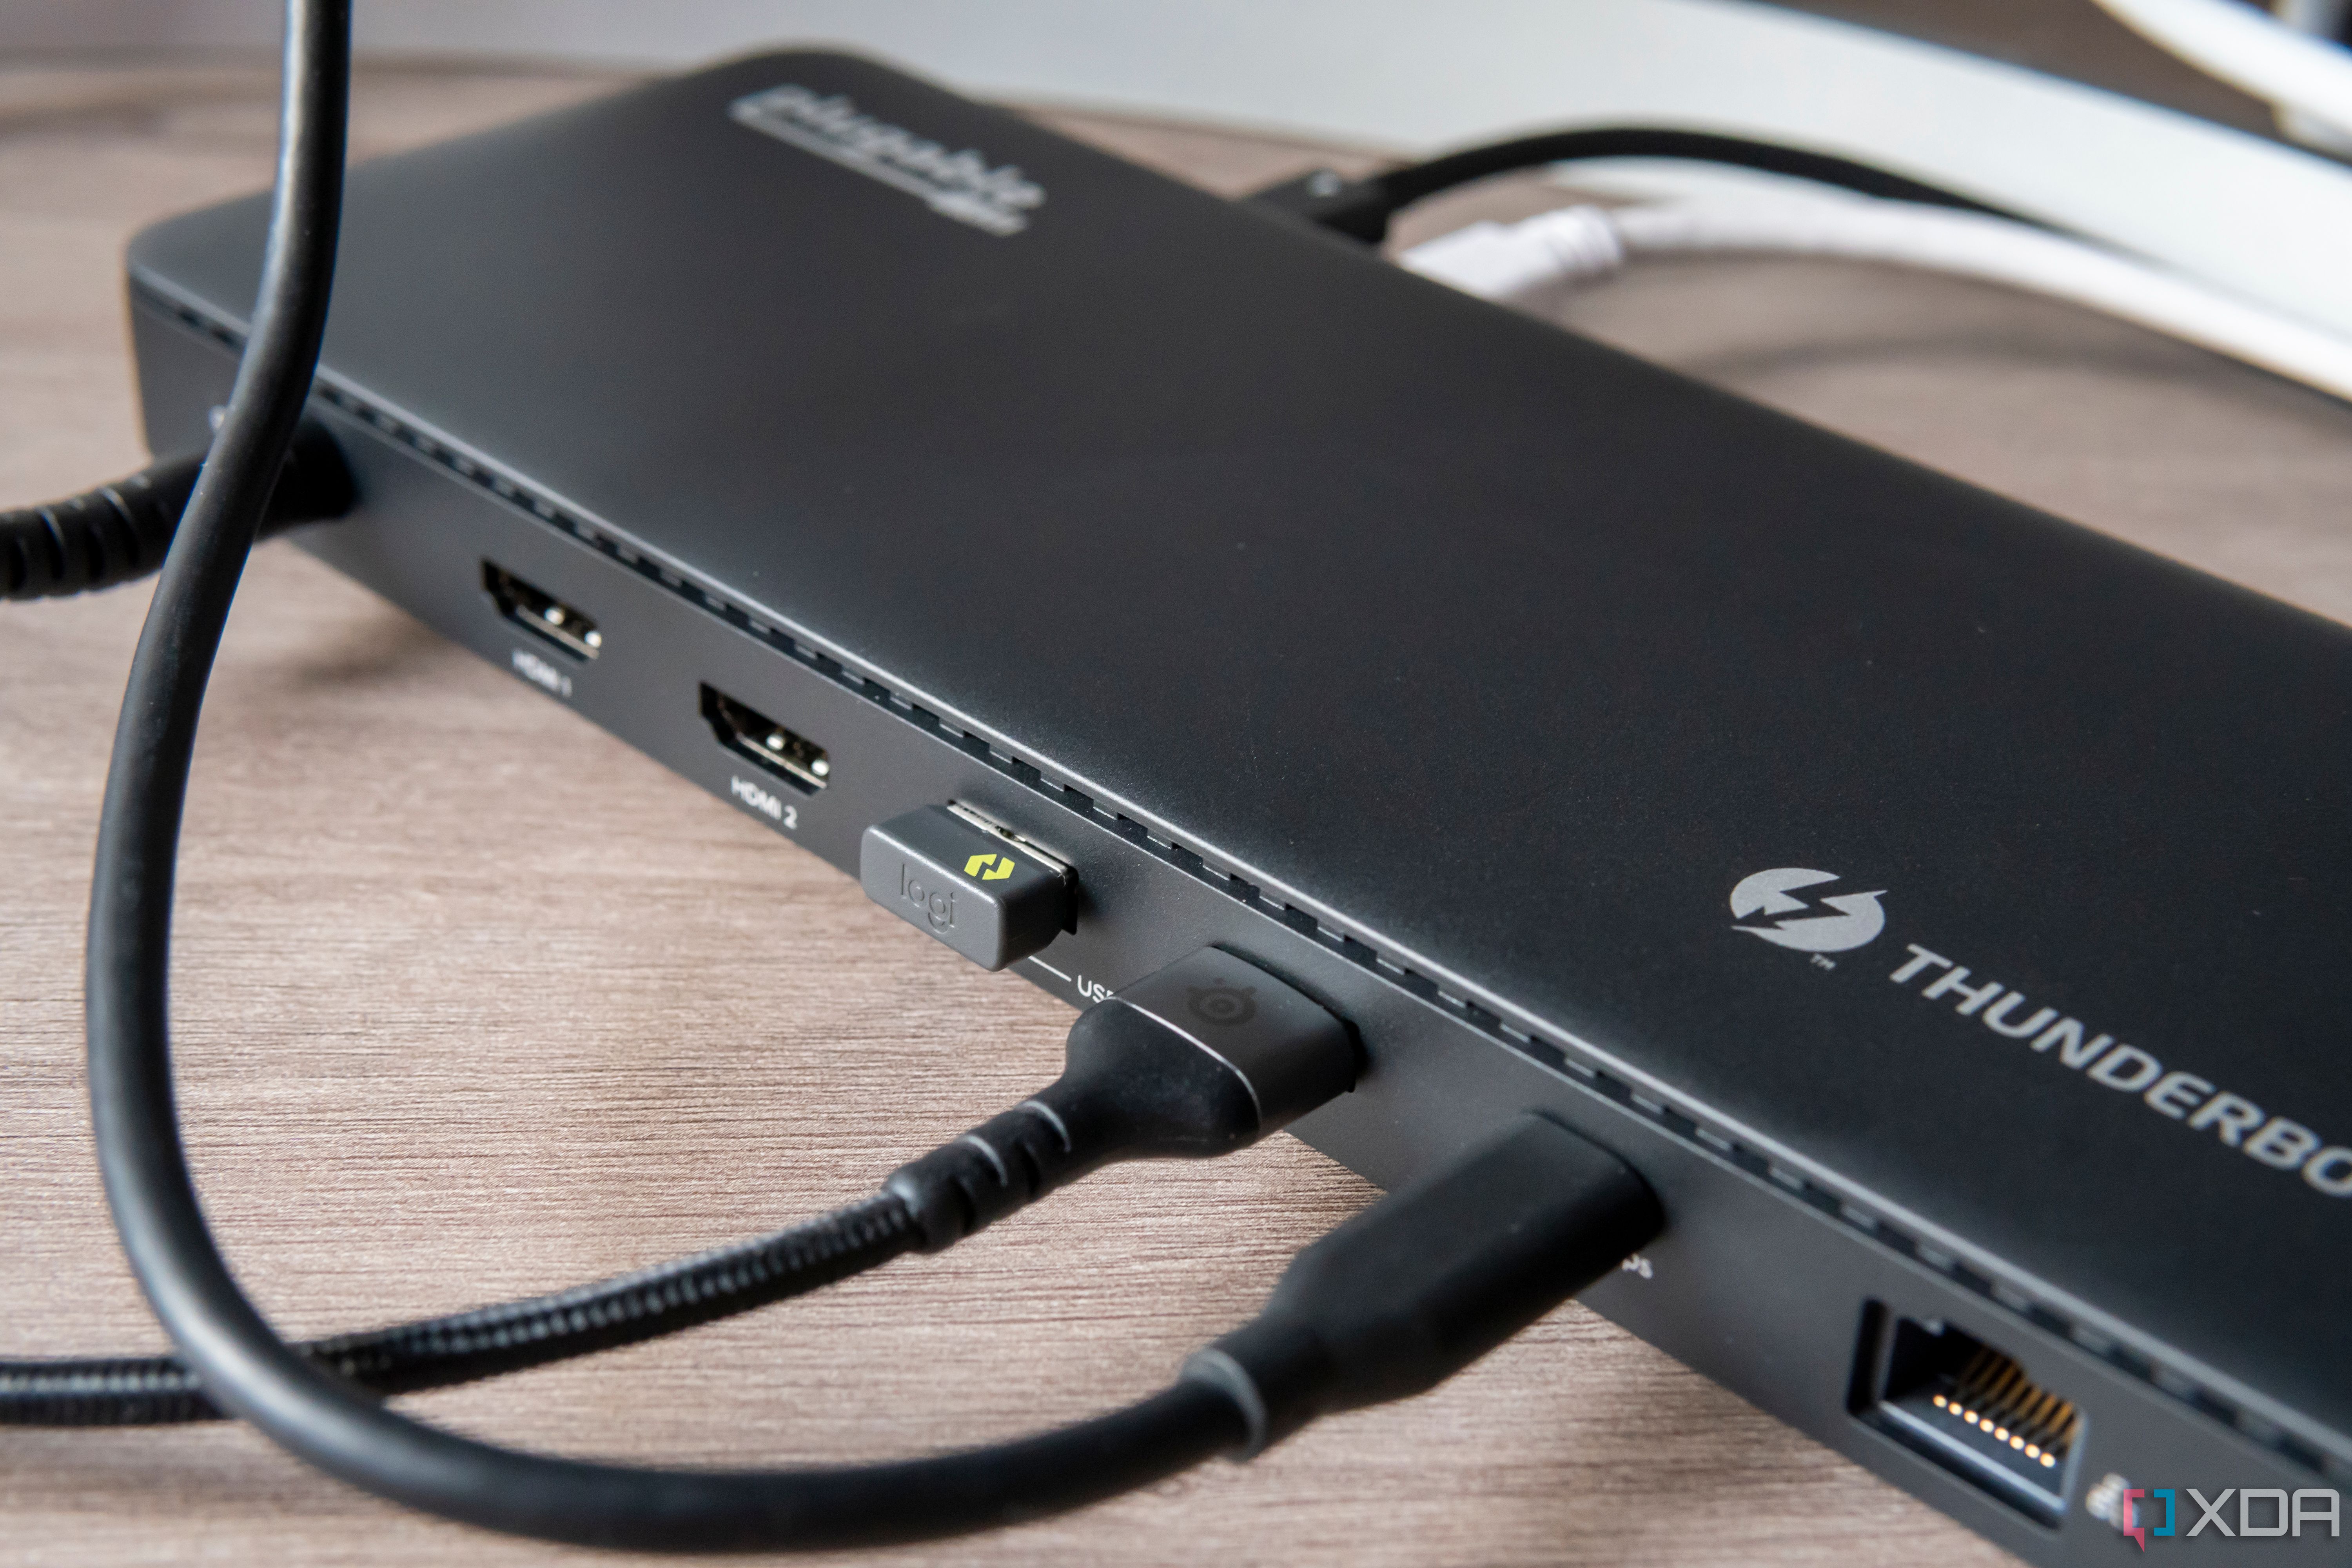 Close-up of the USB ports on the back of the Plugable TBT4-UD5 docking station with peripherals connected